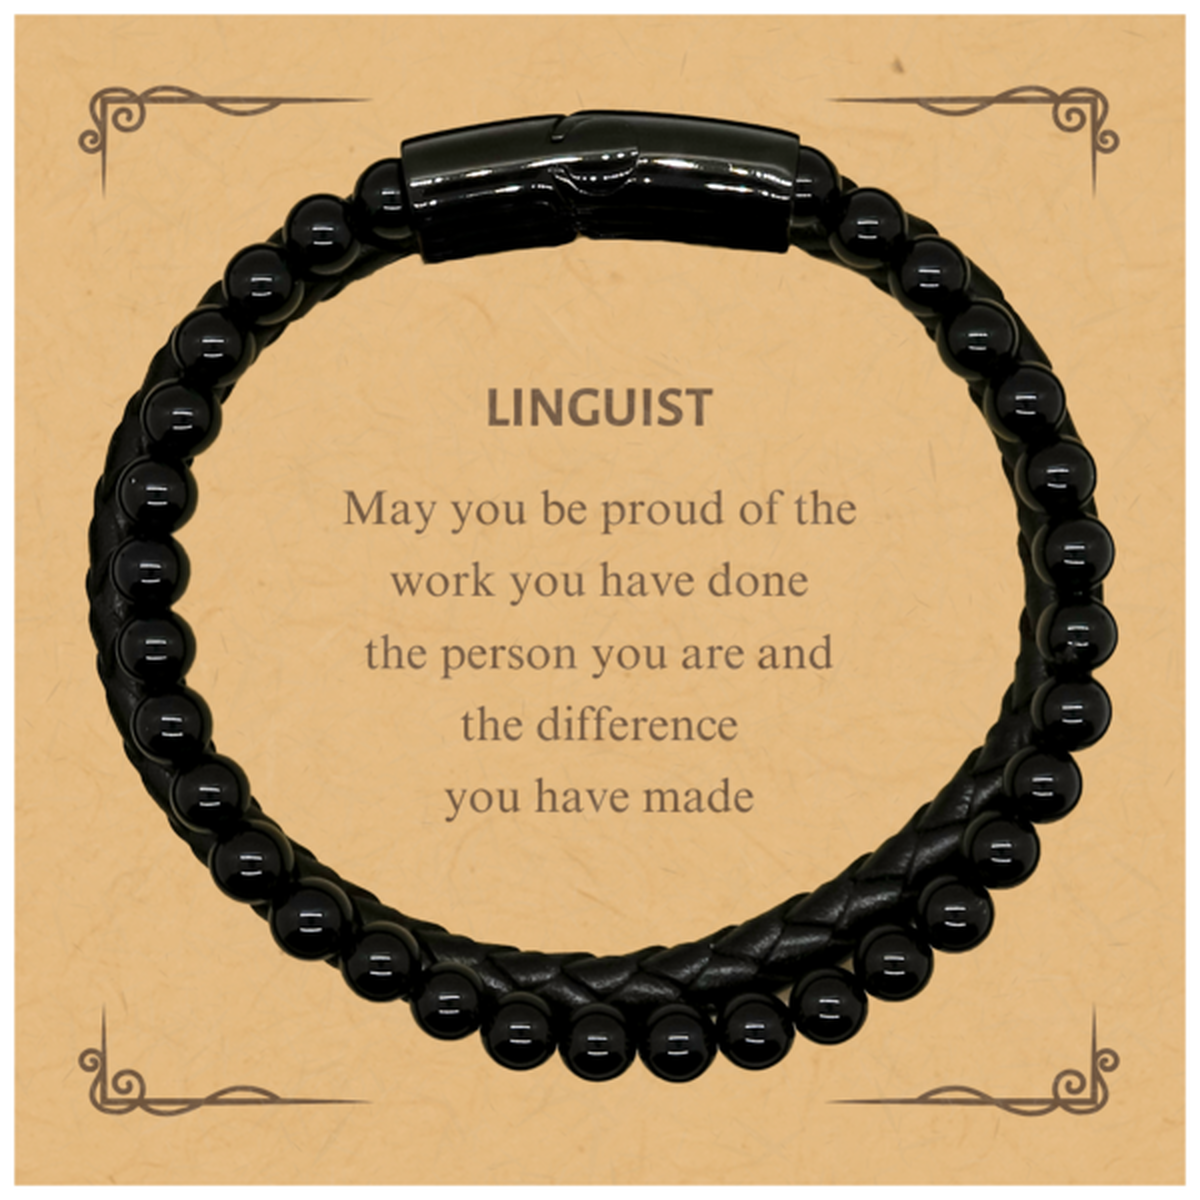 Linguist May you be proud of the work you have done, Retirement Linguist Stone Leather Bracelets for Colleague Appreciation Gifts Amazing for Linguist